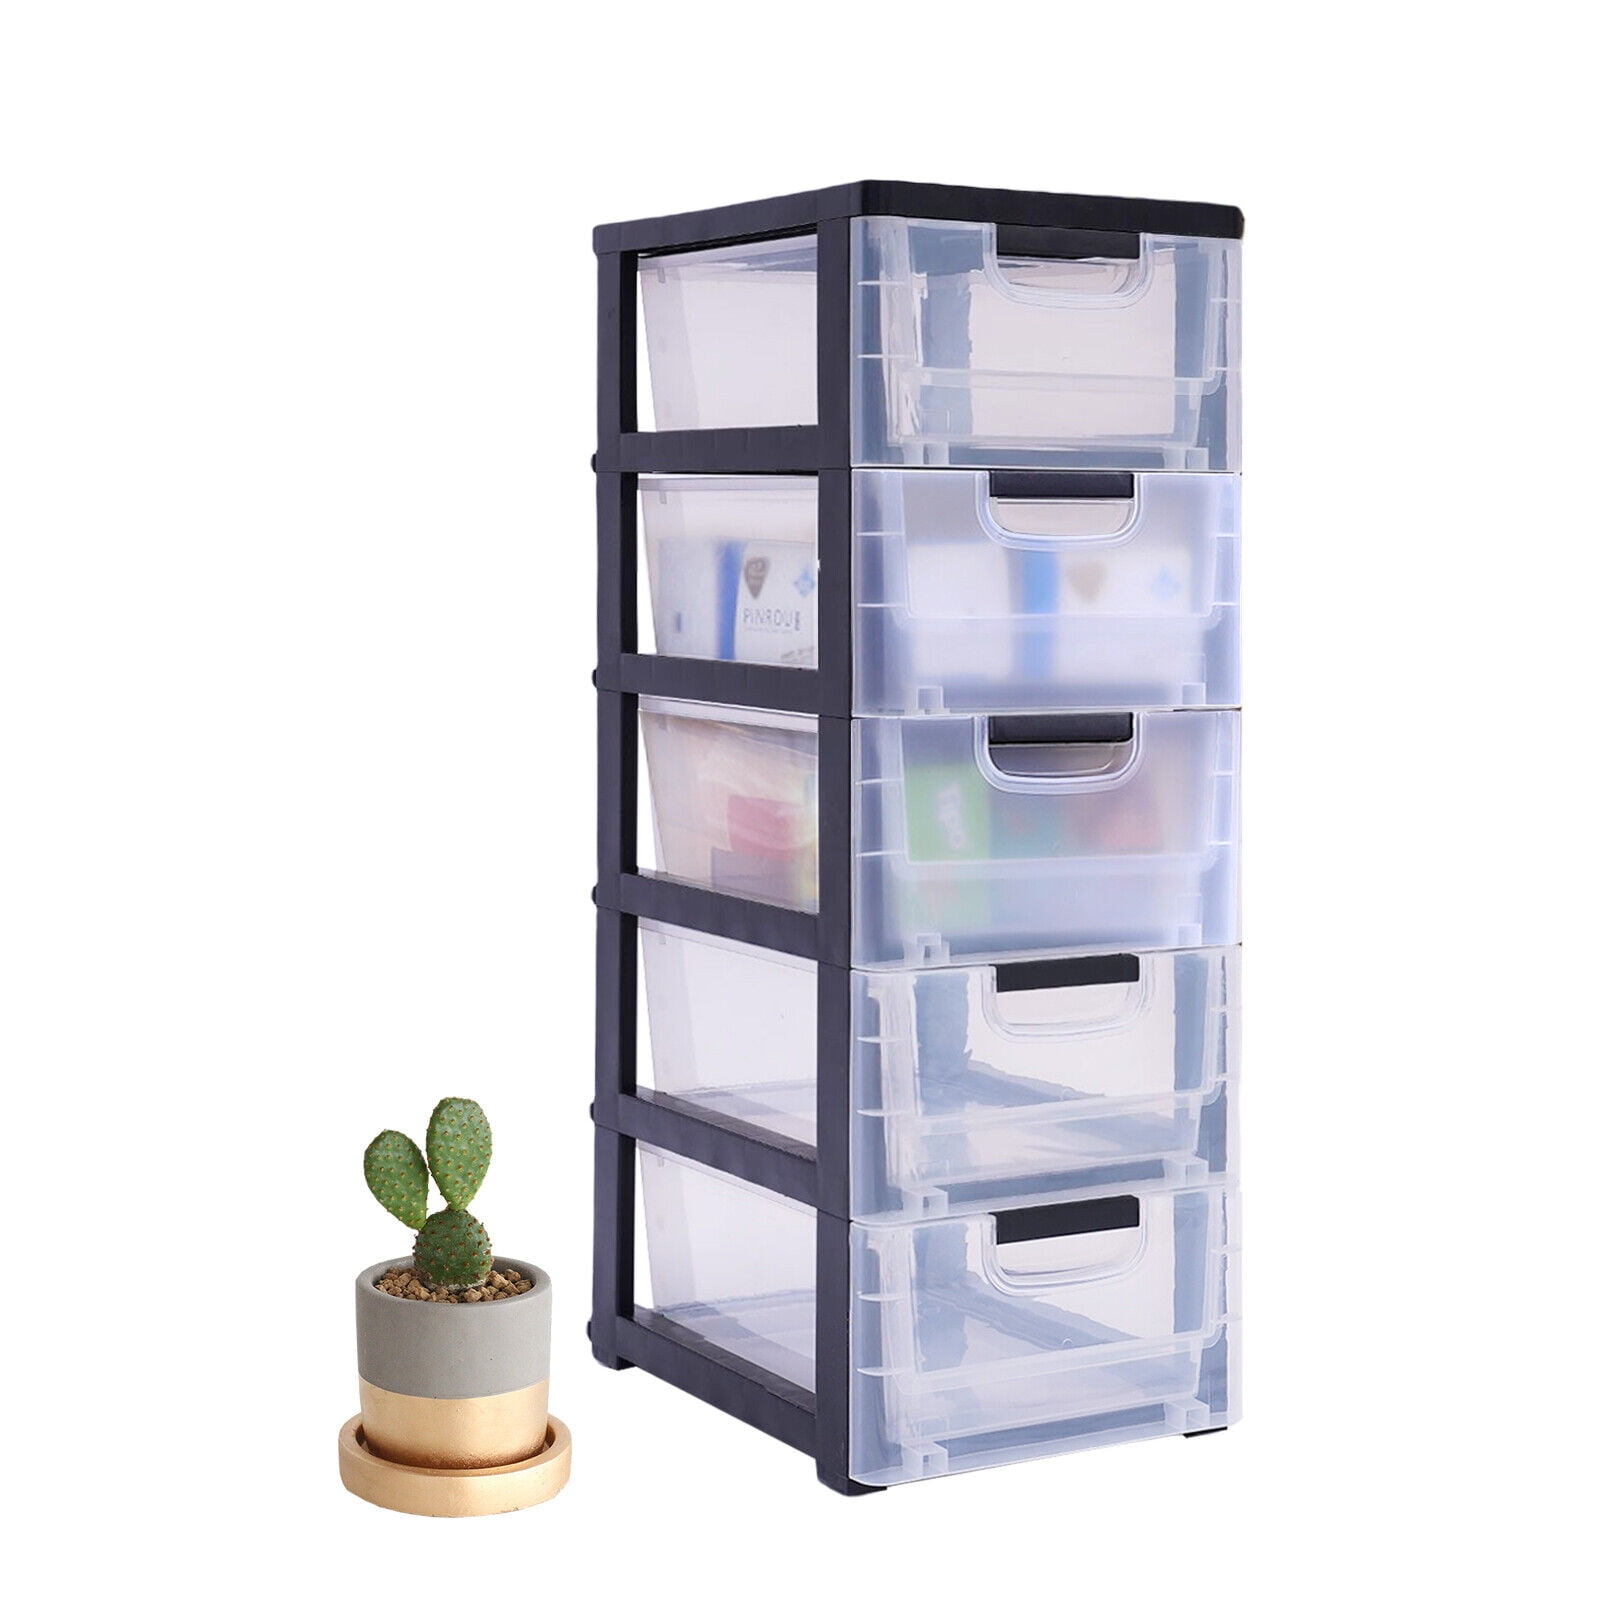 Sterilite Narrow Storage Trays for Desktop and Drawer Organizing (24 Pack)